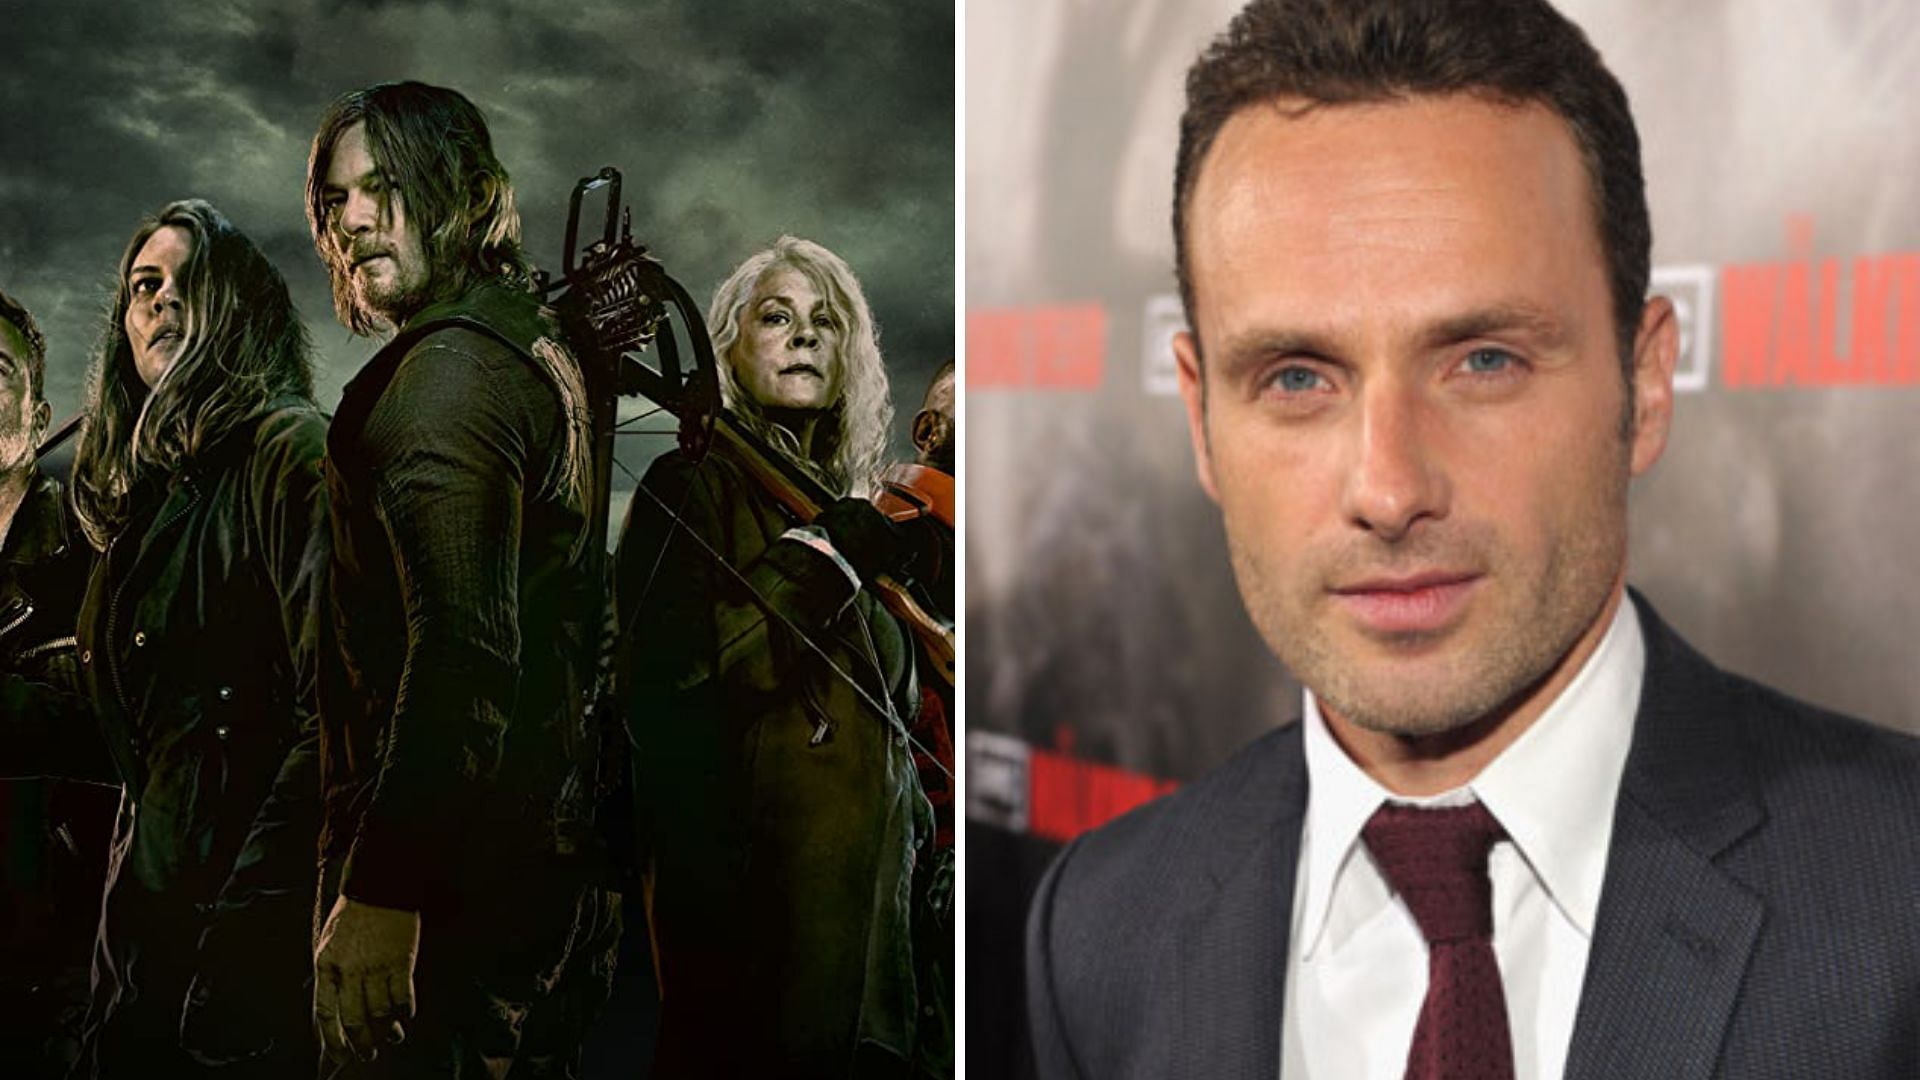 Andrew Lincoln played the role of Rick Grimes in The Walking Dead (Images via IMDb)